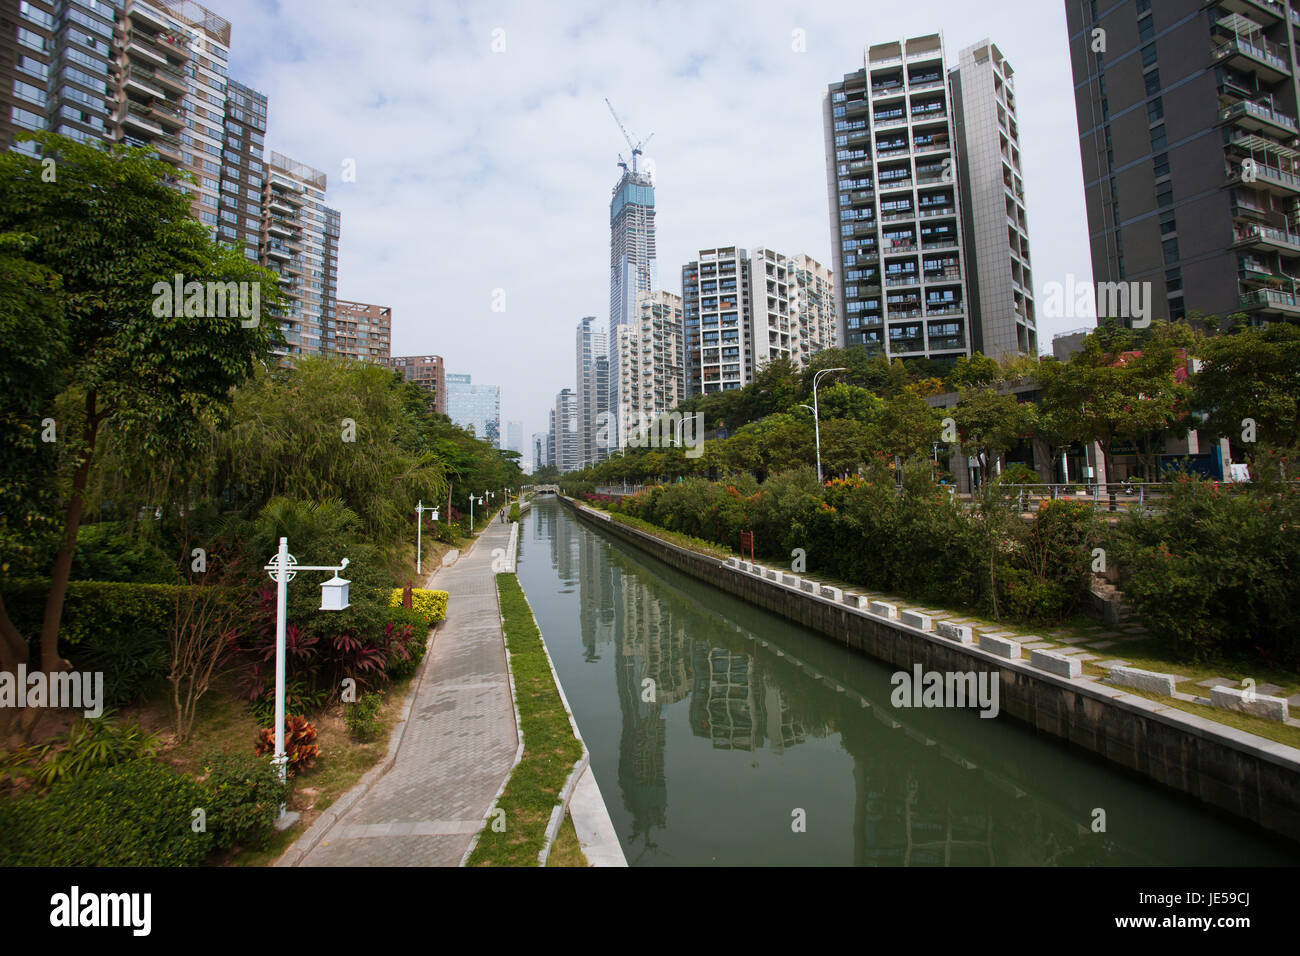 Residential buildings in Shekou - residential part of Nanshan municipality; city of Shenzhen; Guangdong province, People's republic of China; Stock Photo